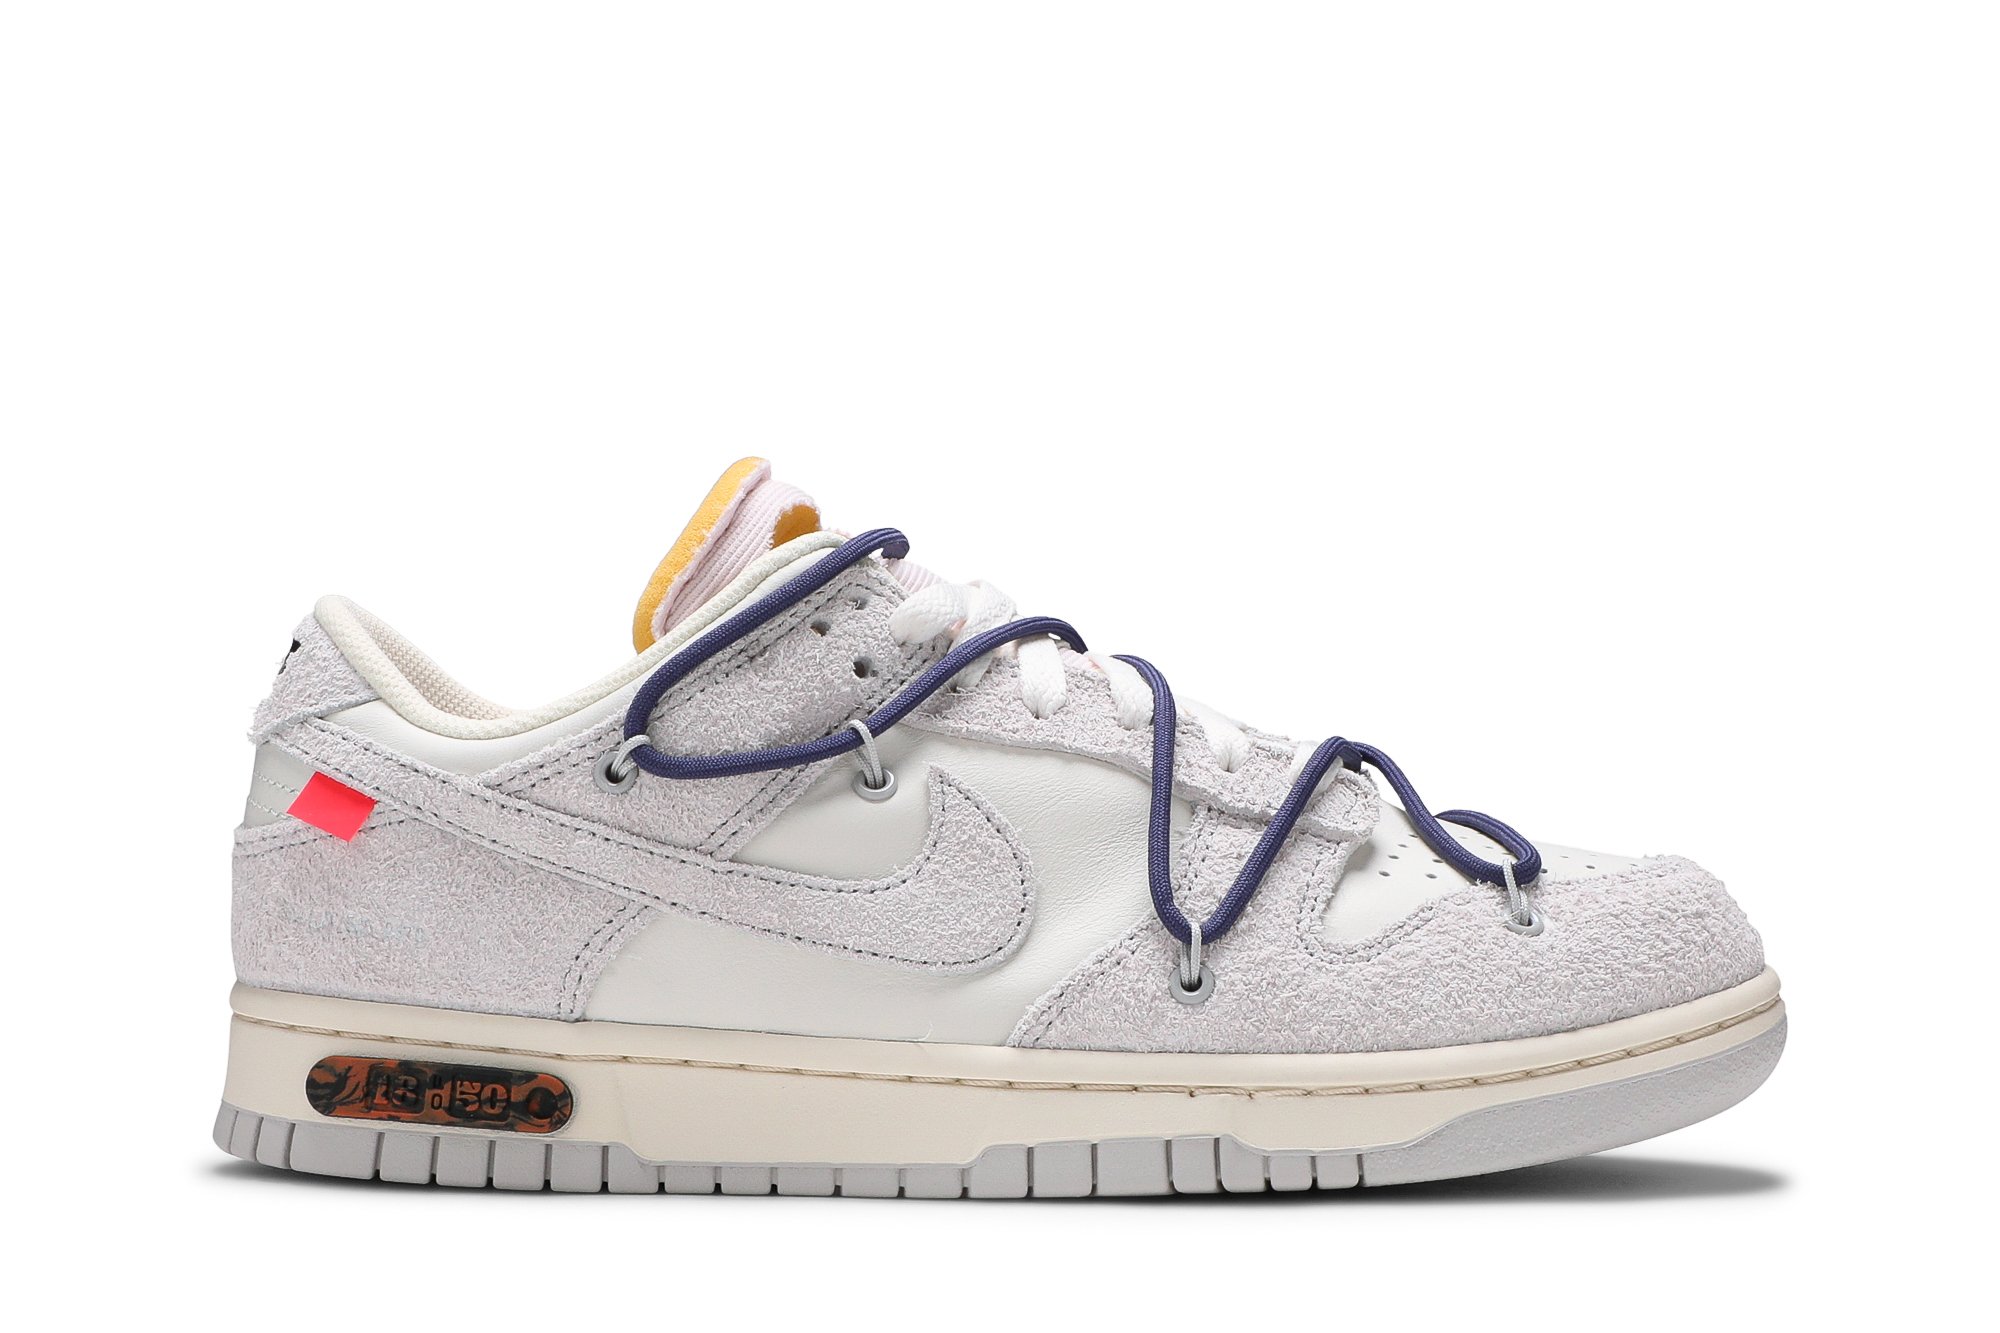 Buy Off-White x Dunk Low 'Lot 18 of 50' - DJ0950 112 | GOAT